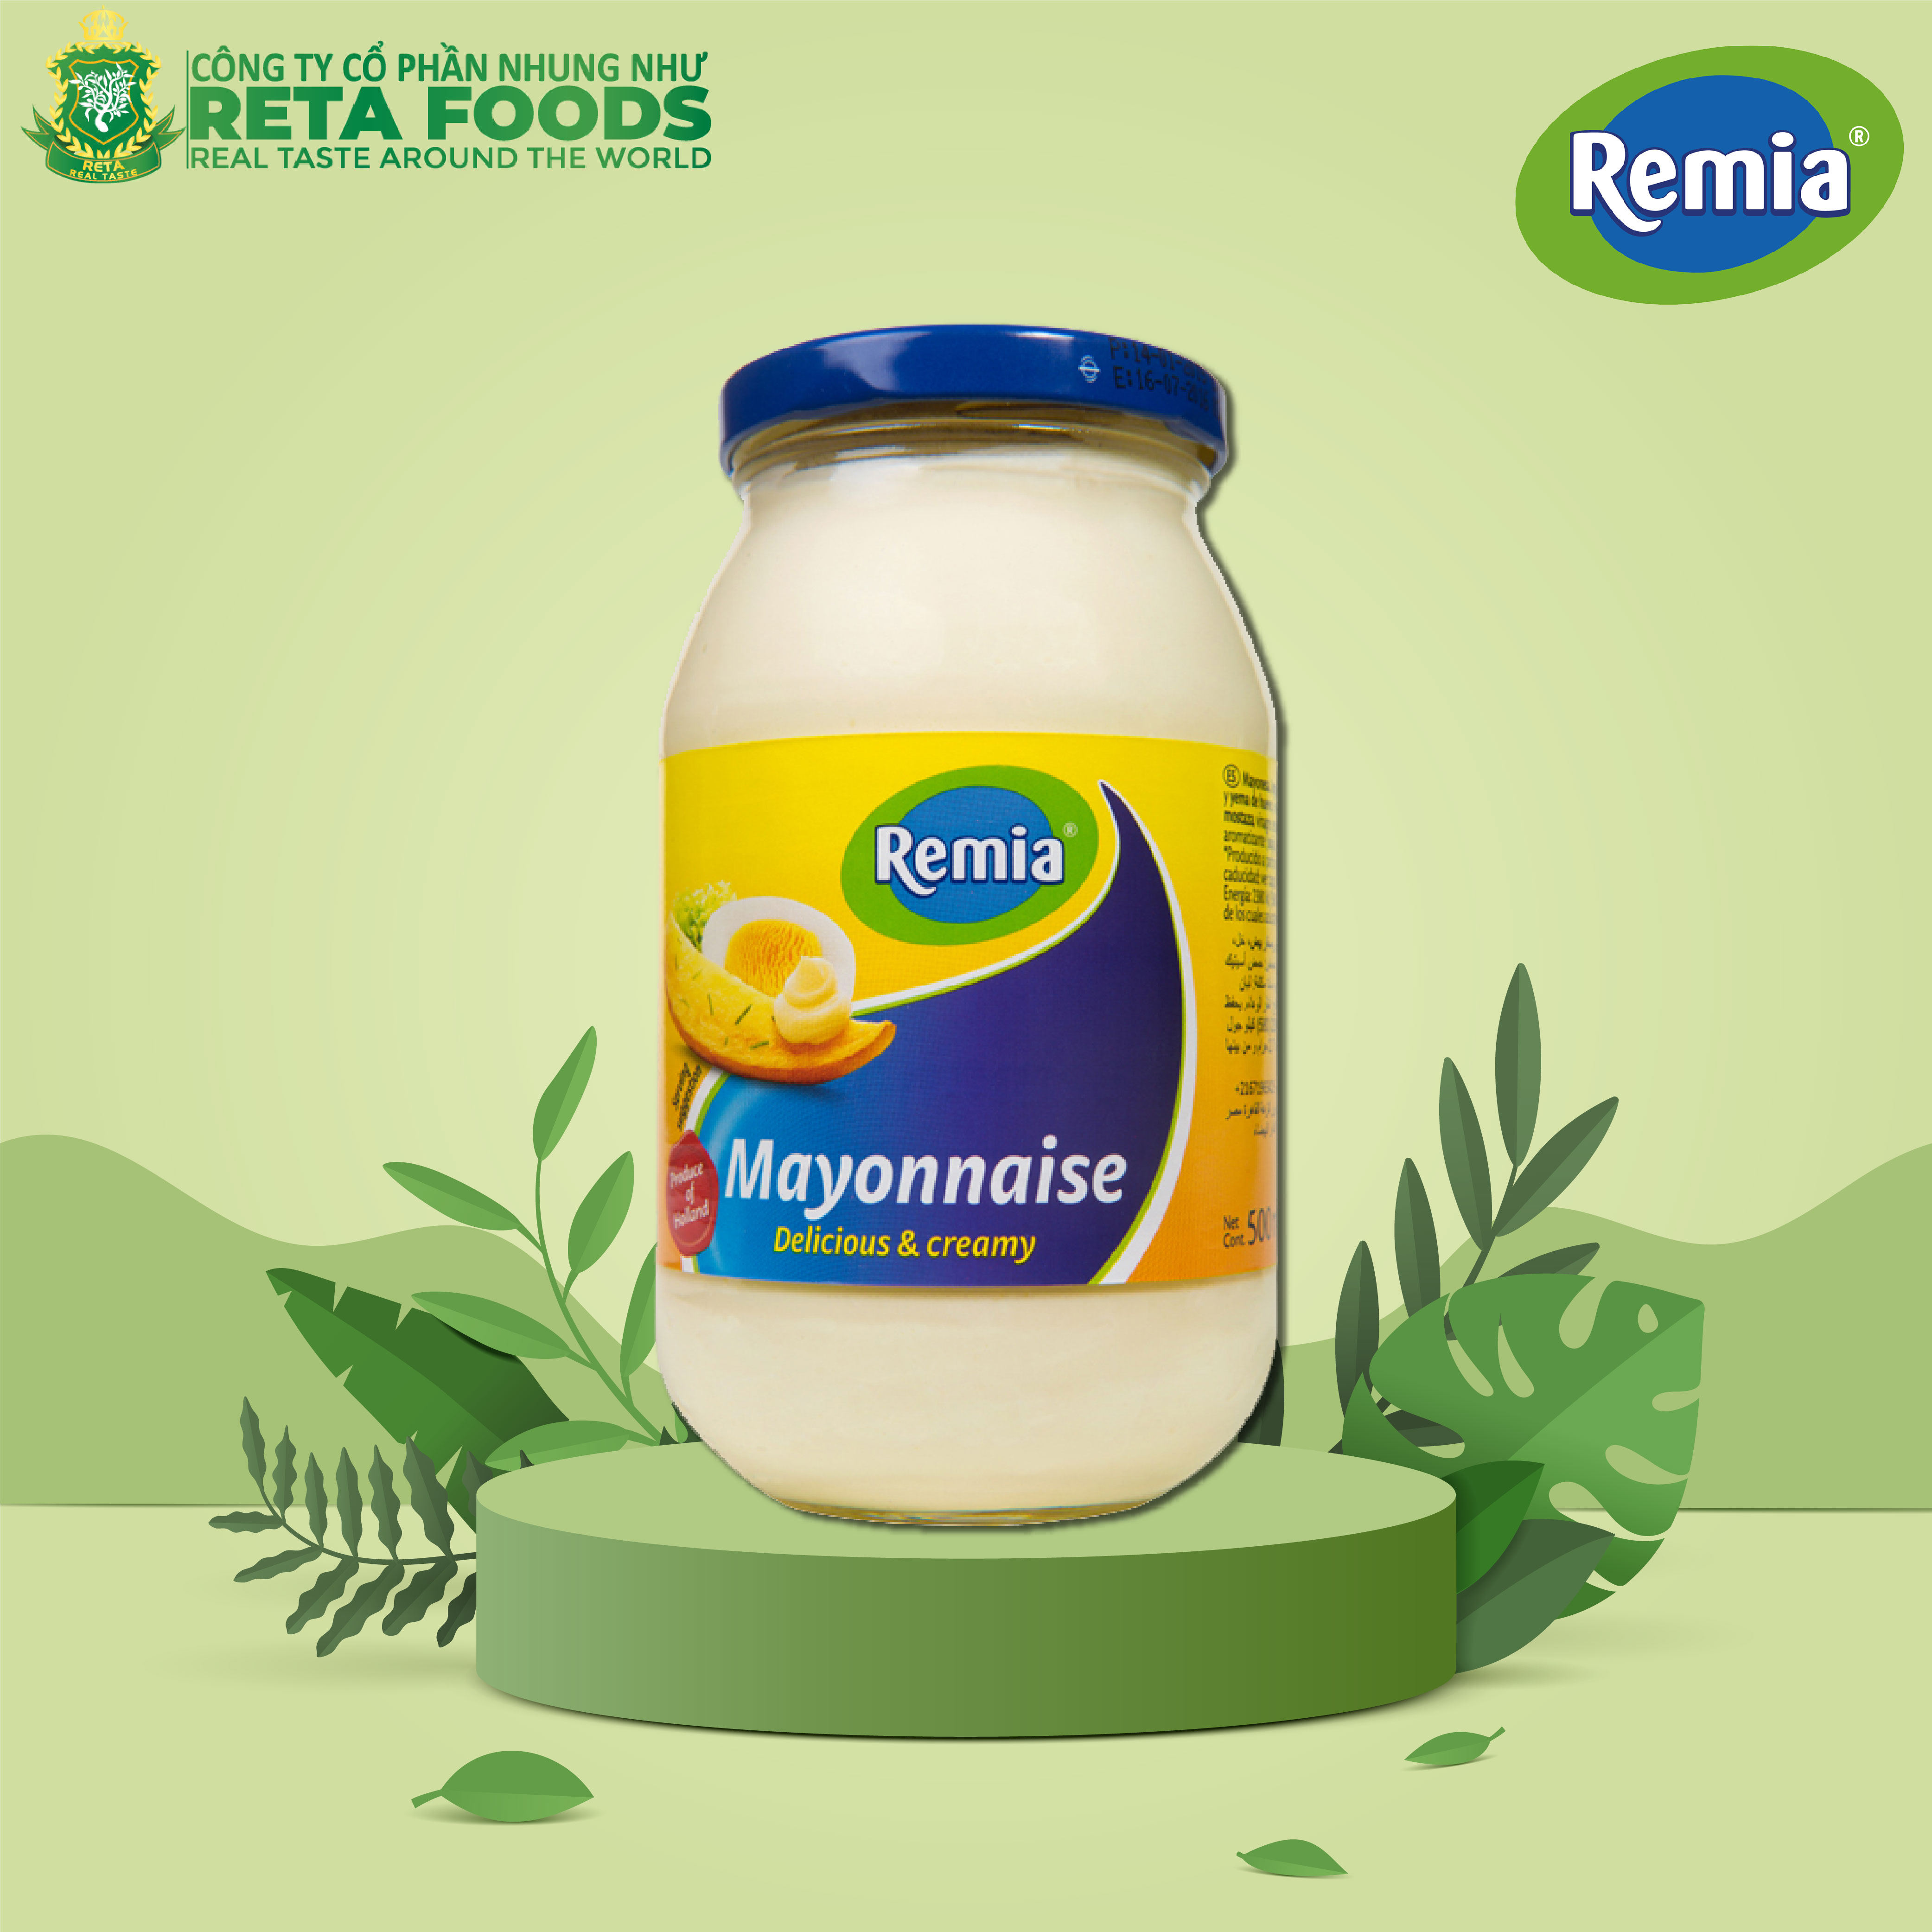 Xốt Remia - Mayonnise 1 L